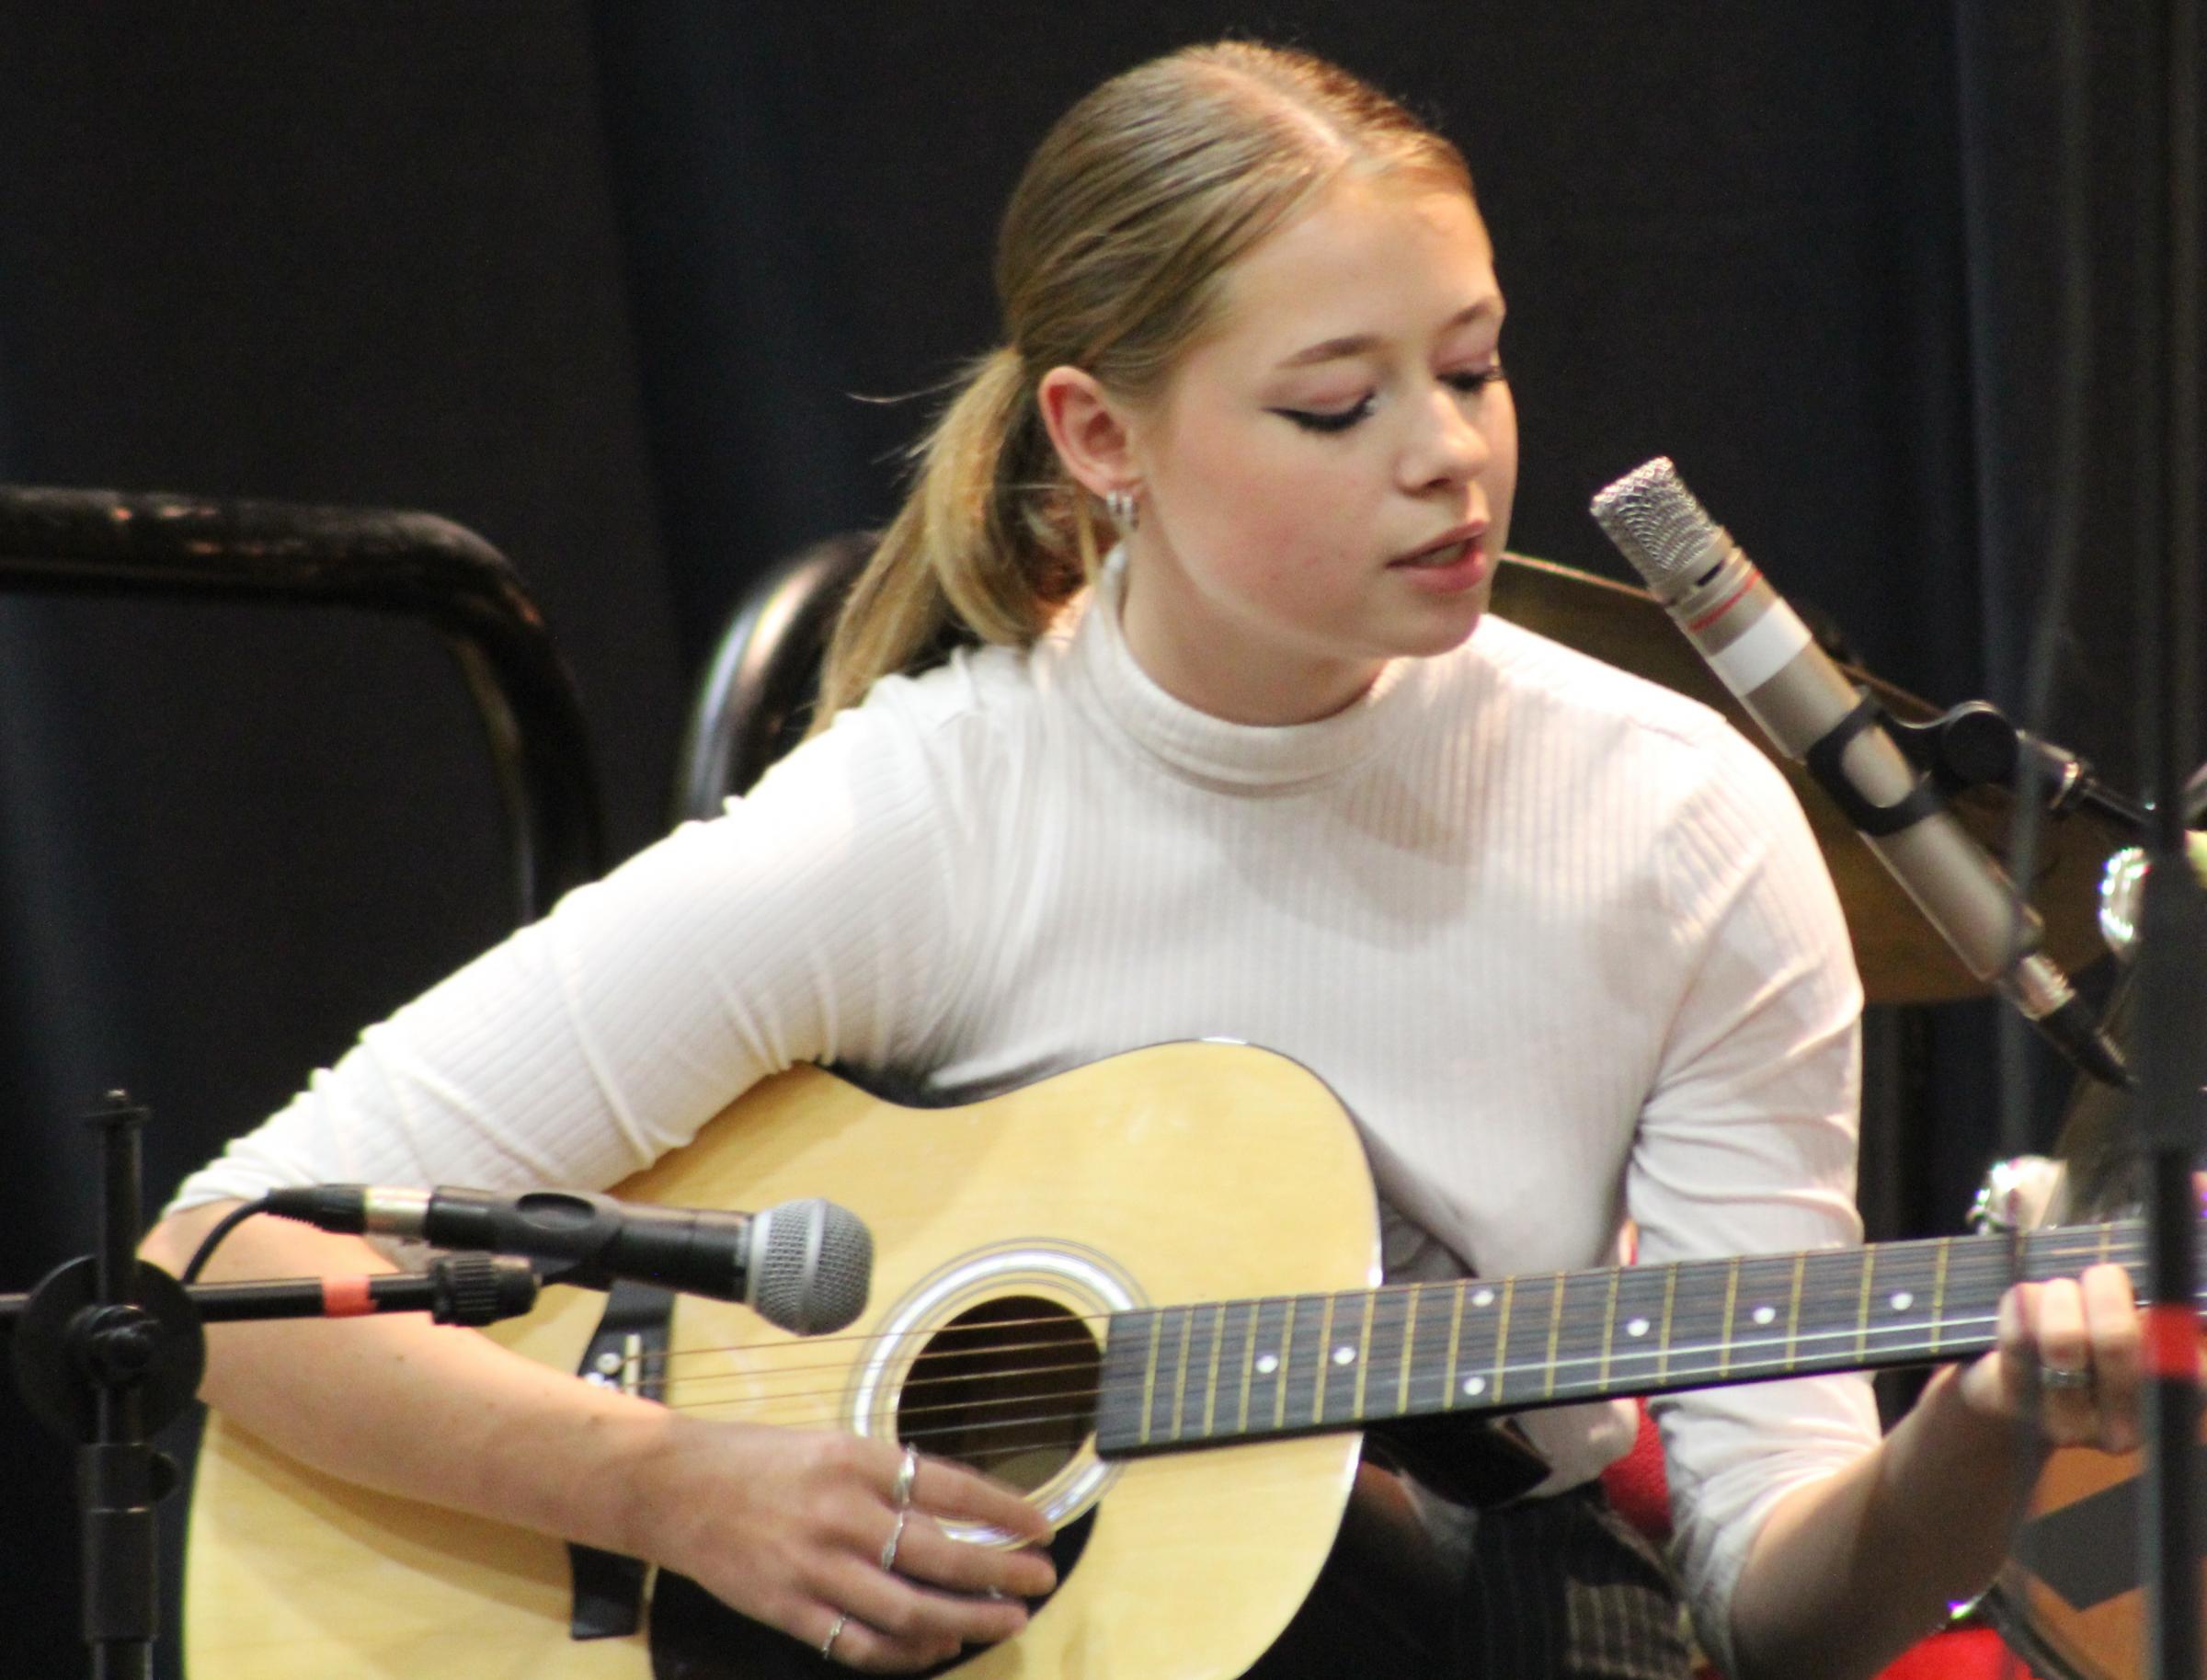 GUITAR: Katie Miller performing at the Prizegiving Event cropped